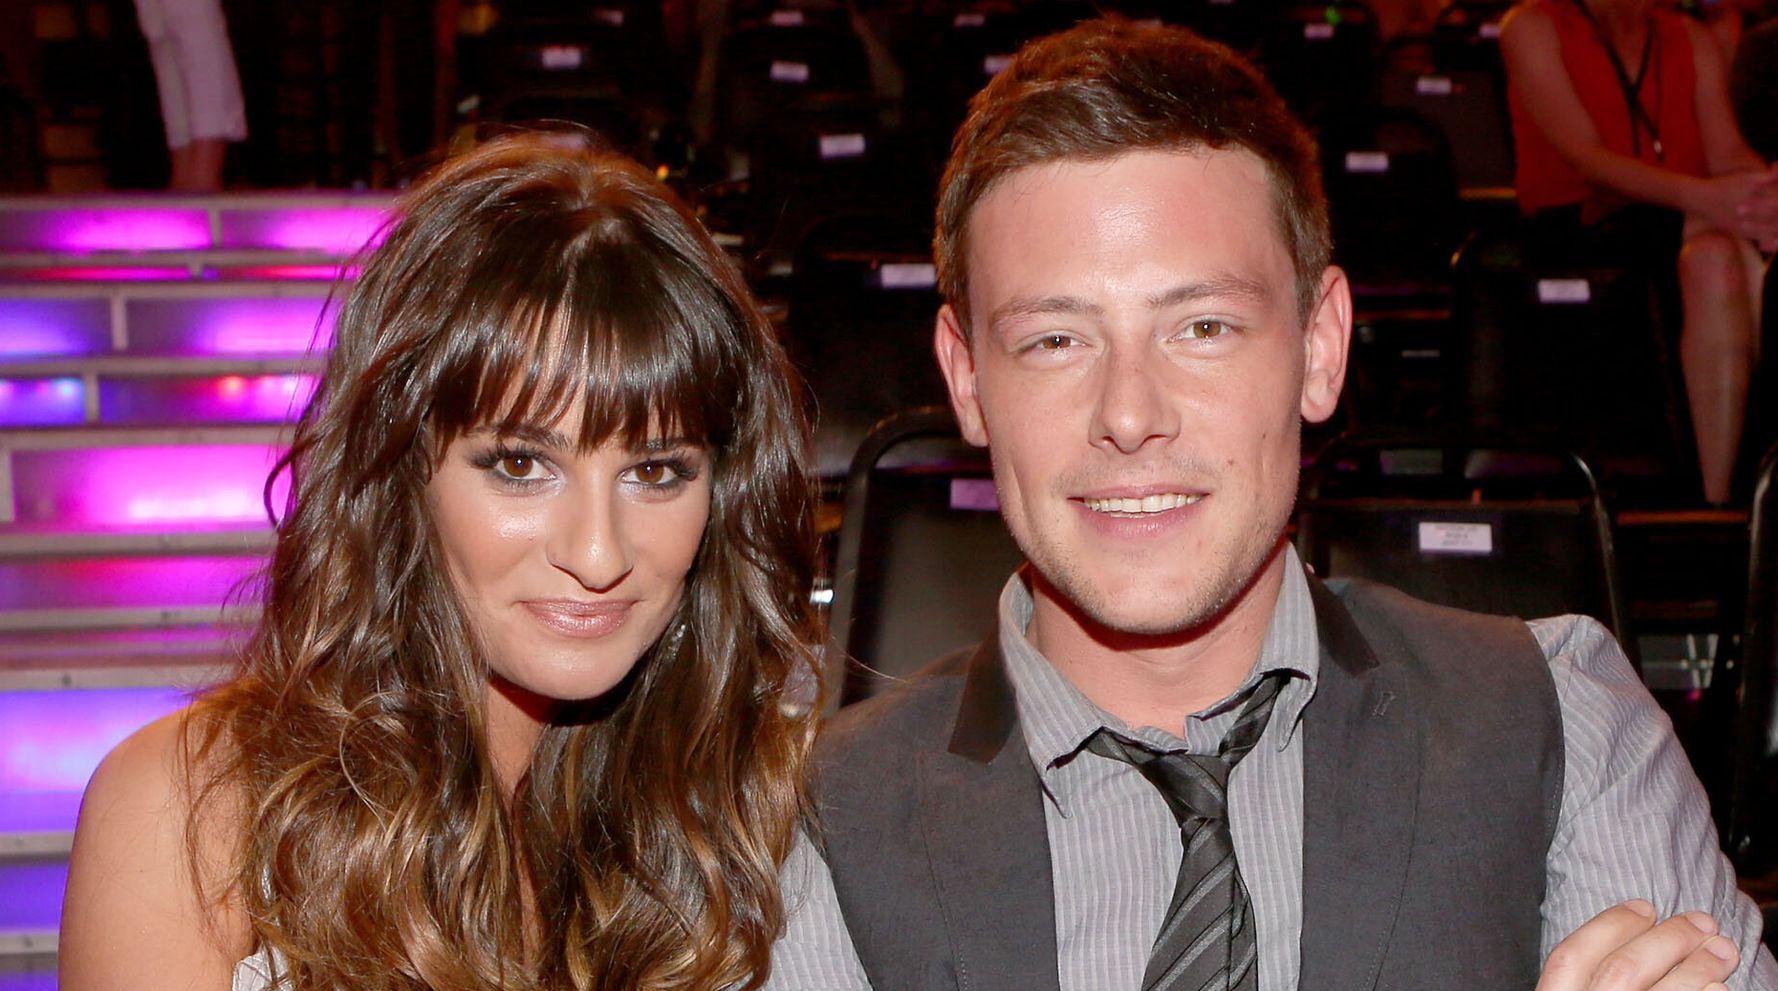 Lea Michele Honors Cory Monteith With Heartwarming Tribute 9 Years After His Death